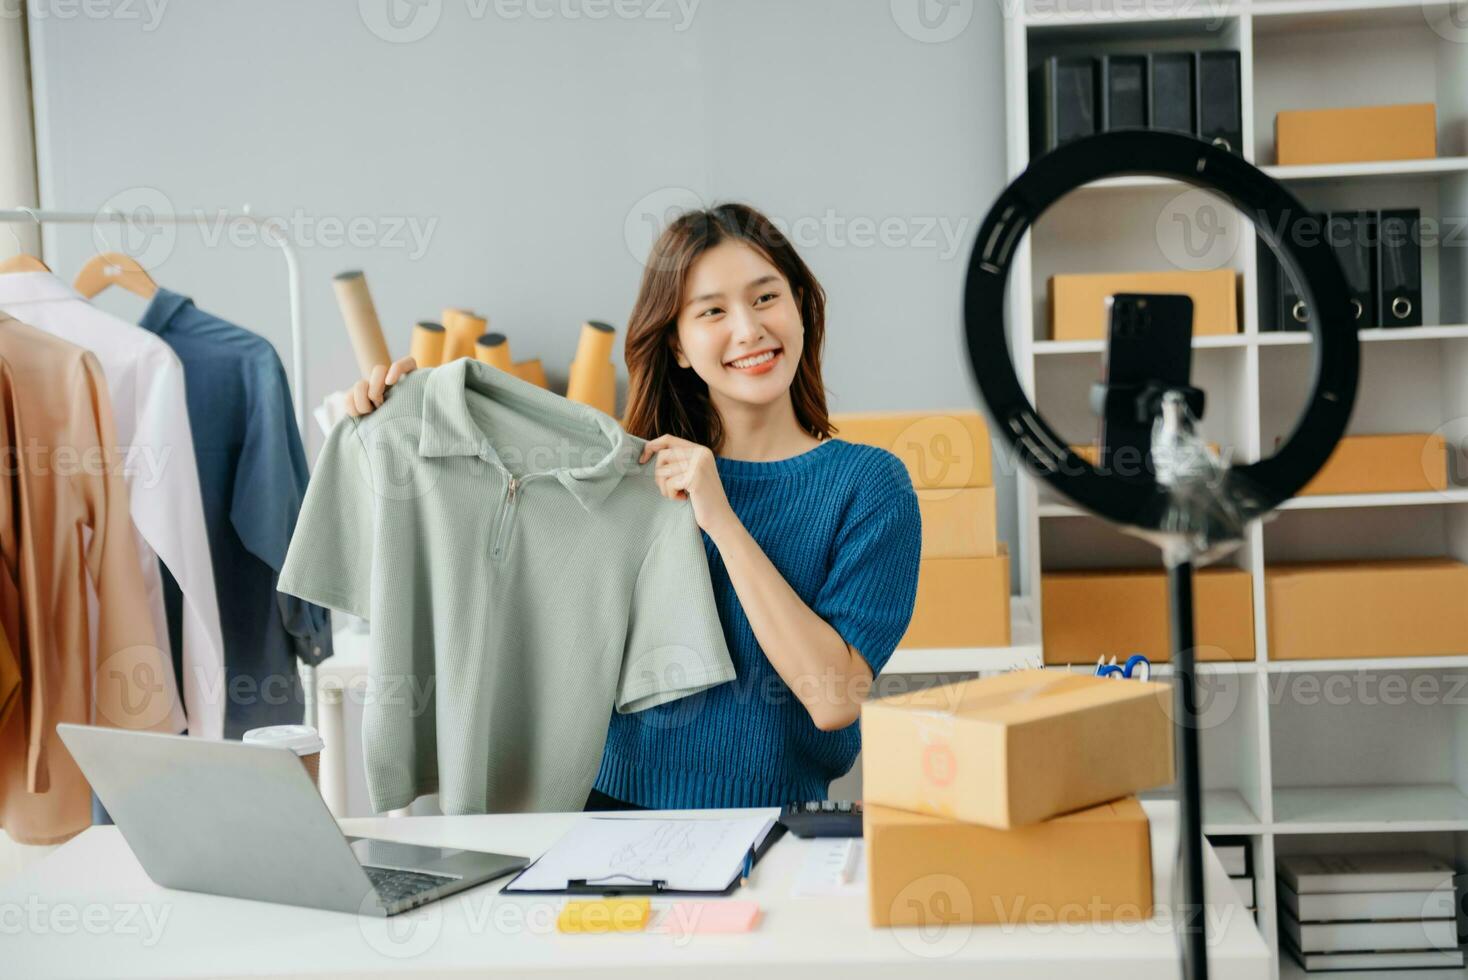 Young woman running online store Startup small business SME, using smartphone or tablet taking receive and checking online purchase shopping photo